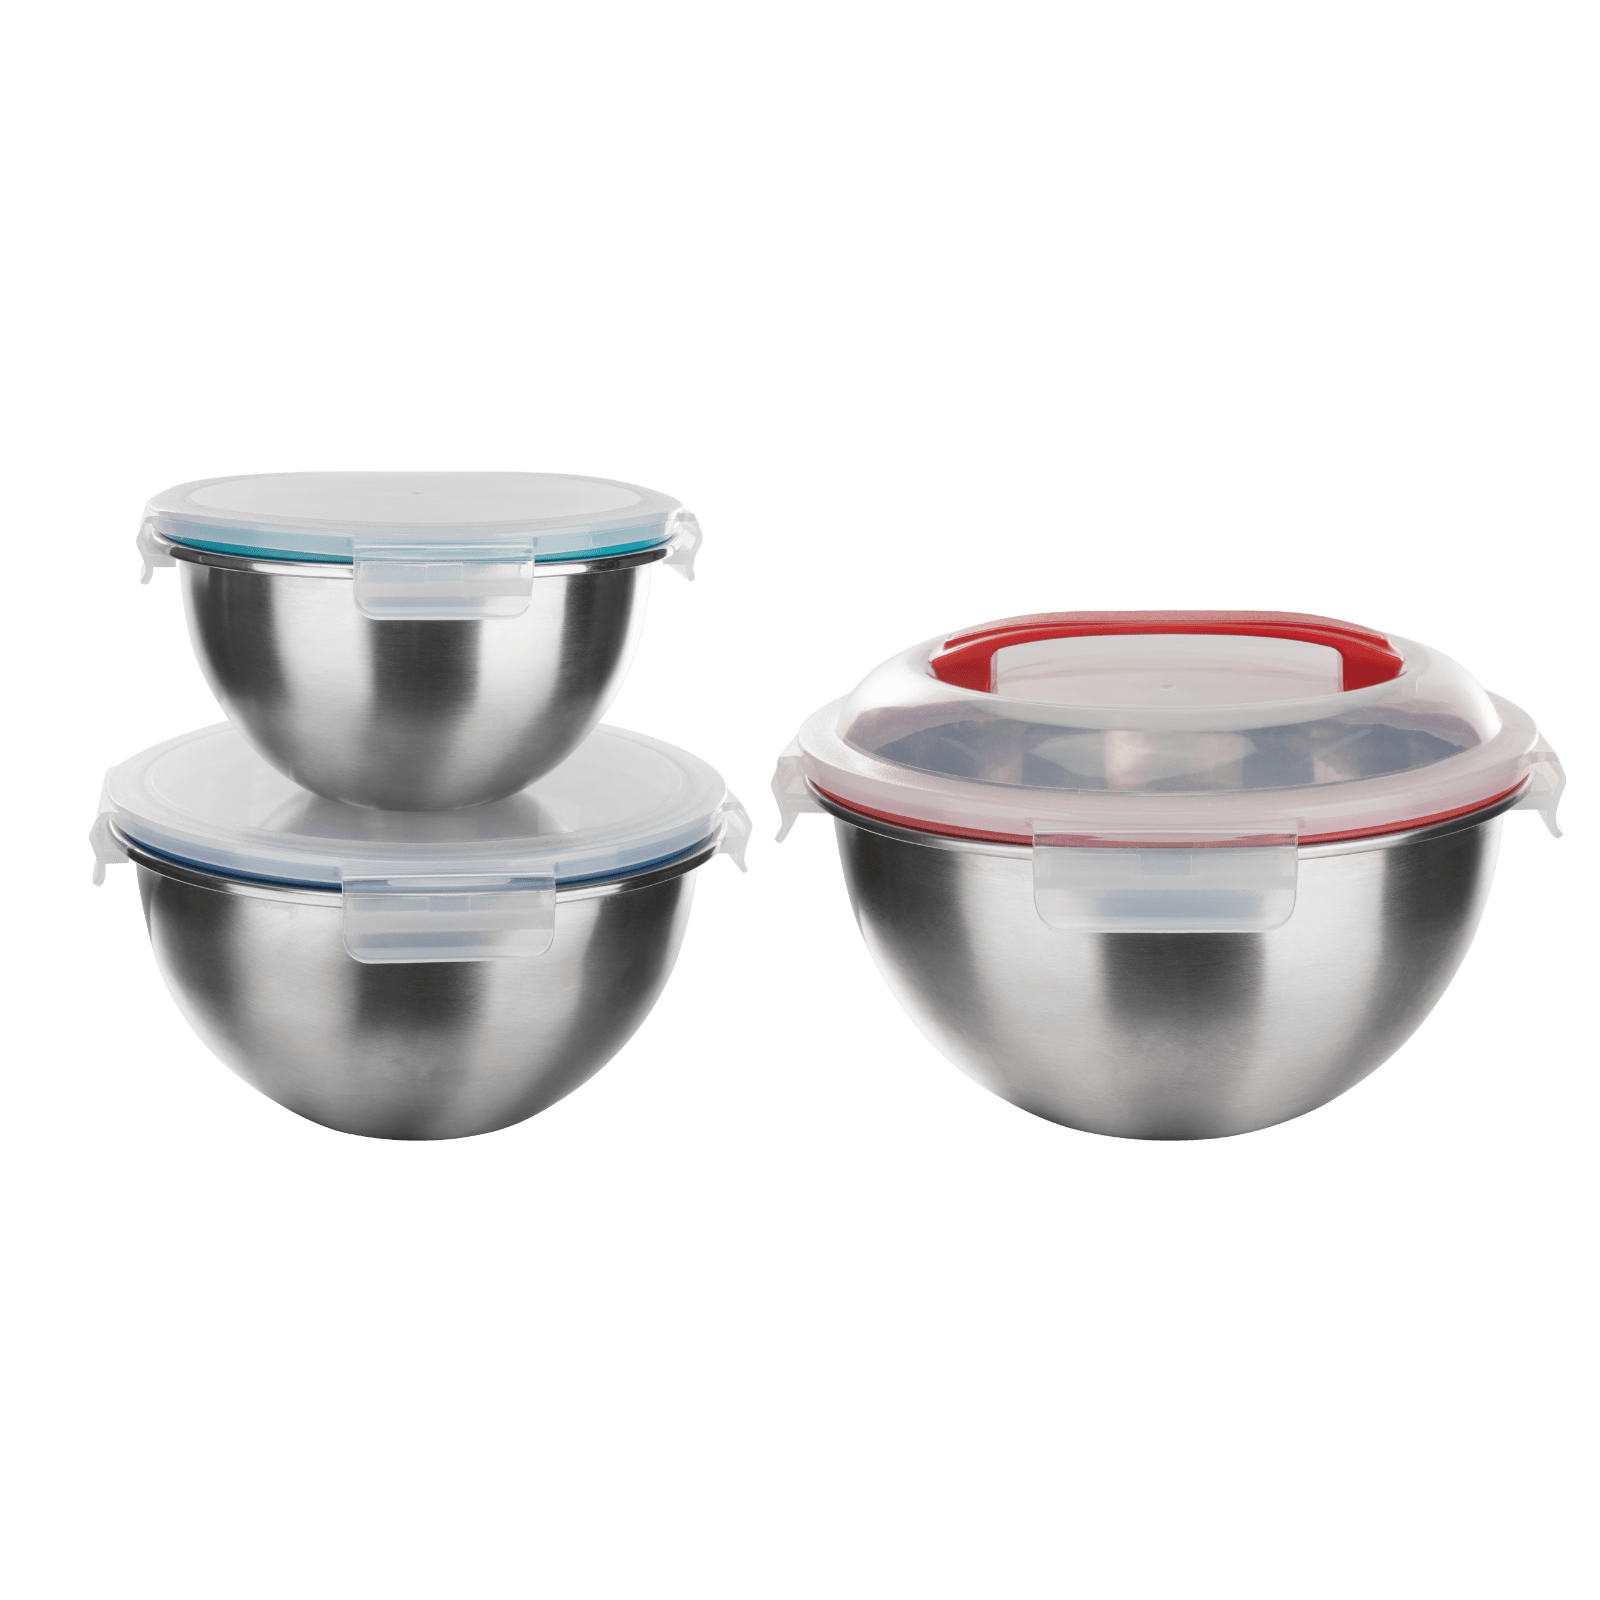 Genicook 3-Piece Stainless Steel Nesting Mixing Bowl Set with Snap-On Lids & Carry Handle - GenicookGenicook